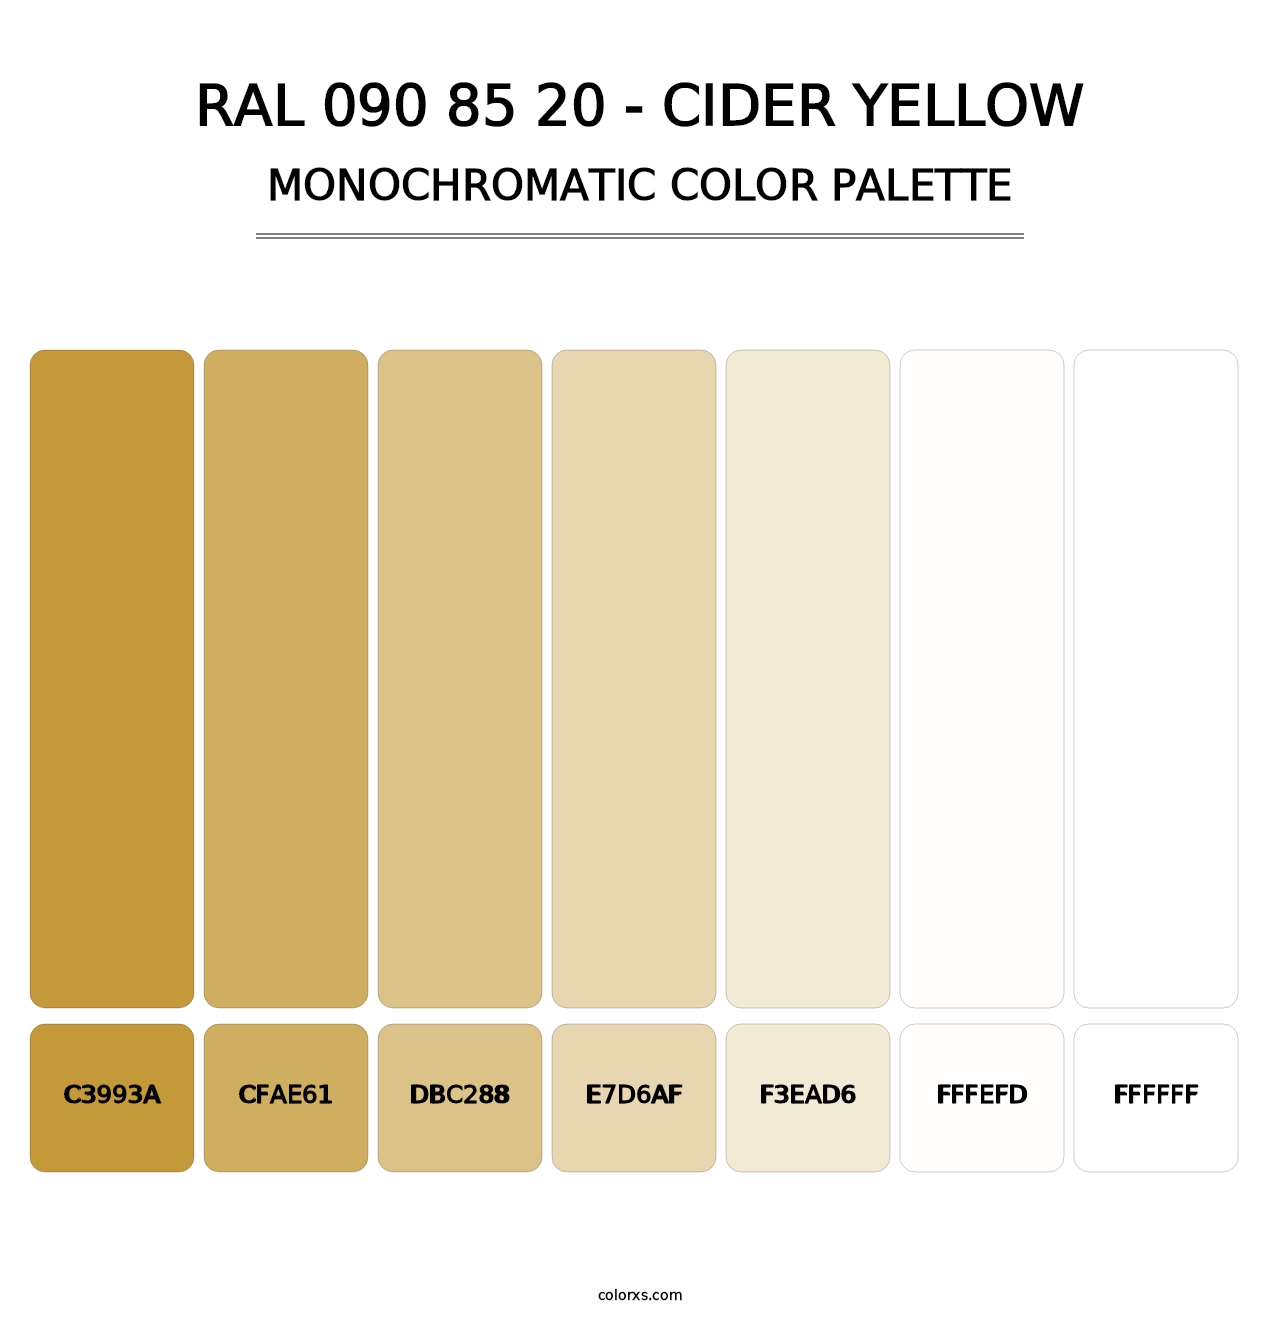 RAL 090 85 20 - Cider Yellow - Monochromatic Color Palette